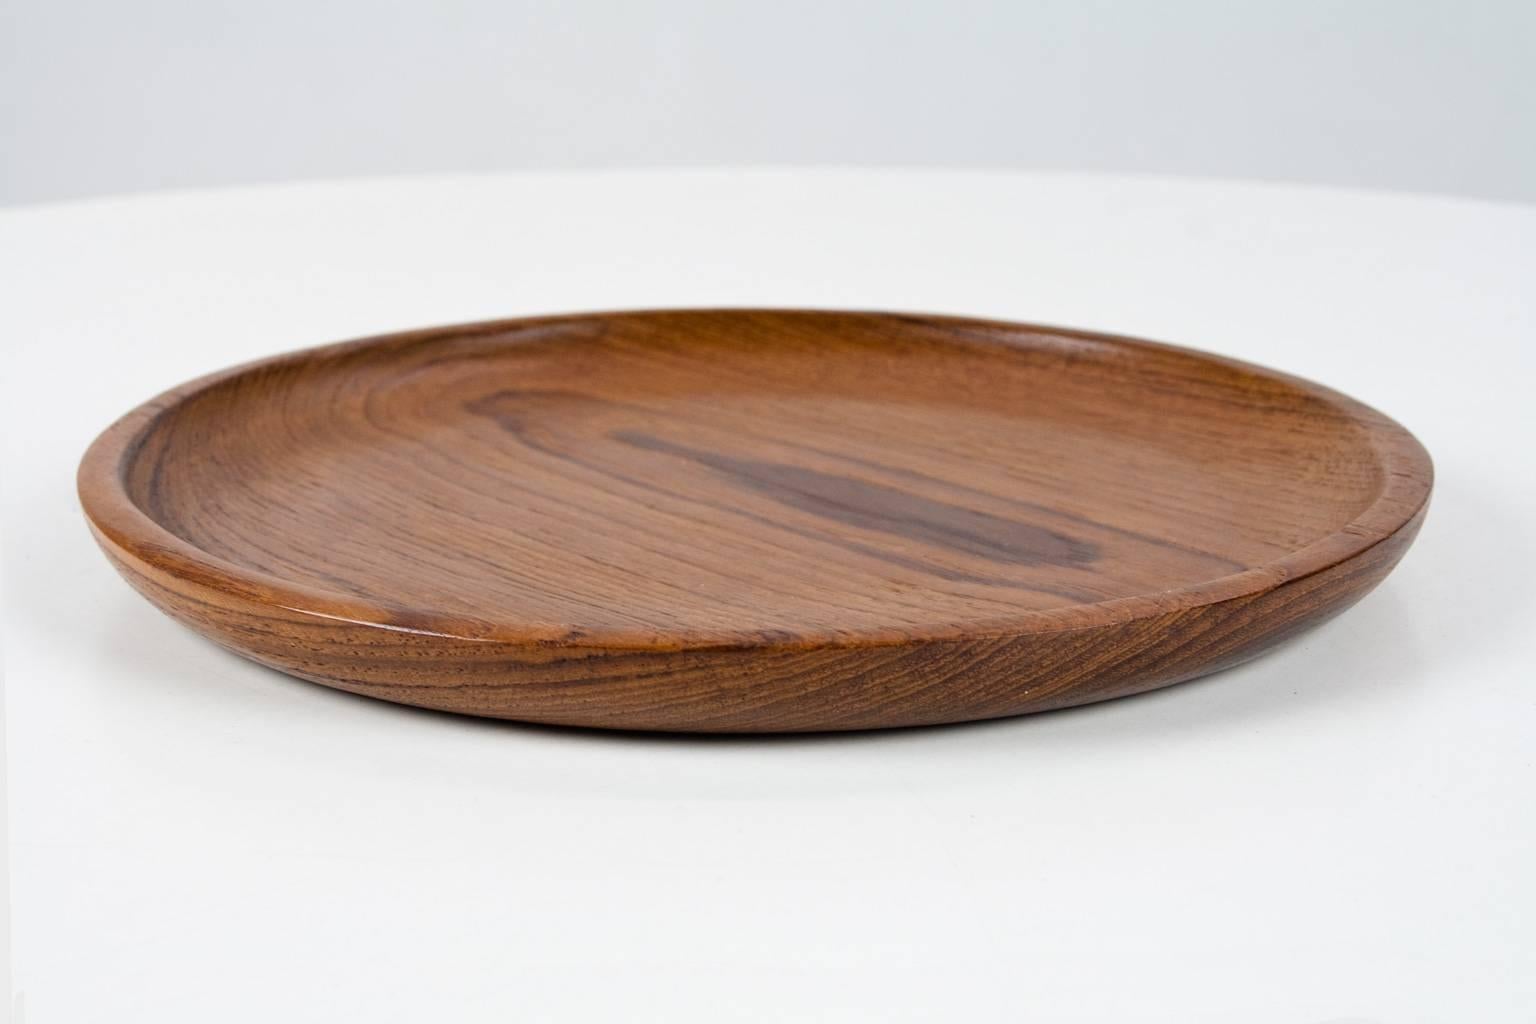 Mid-Century Modern Danish hand moulded and sculptural teak plate or platter in excellent condition. Bought in the early 1960s in Denmark, Scandinavian Modern design.

Beautiful table piece and home accessory in very beautiful condition made of 7